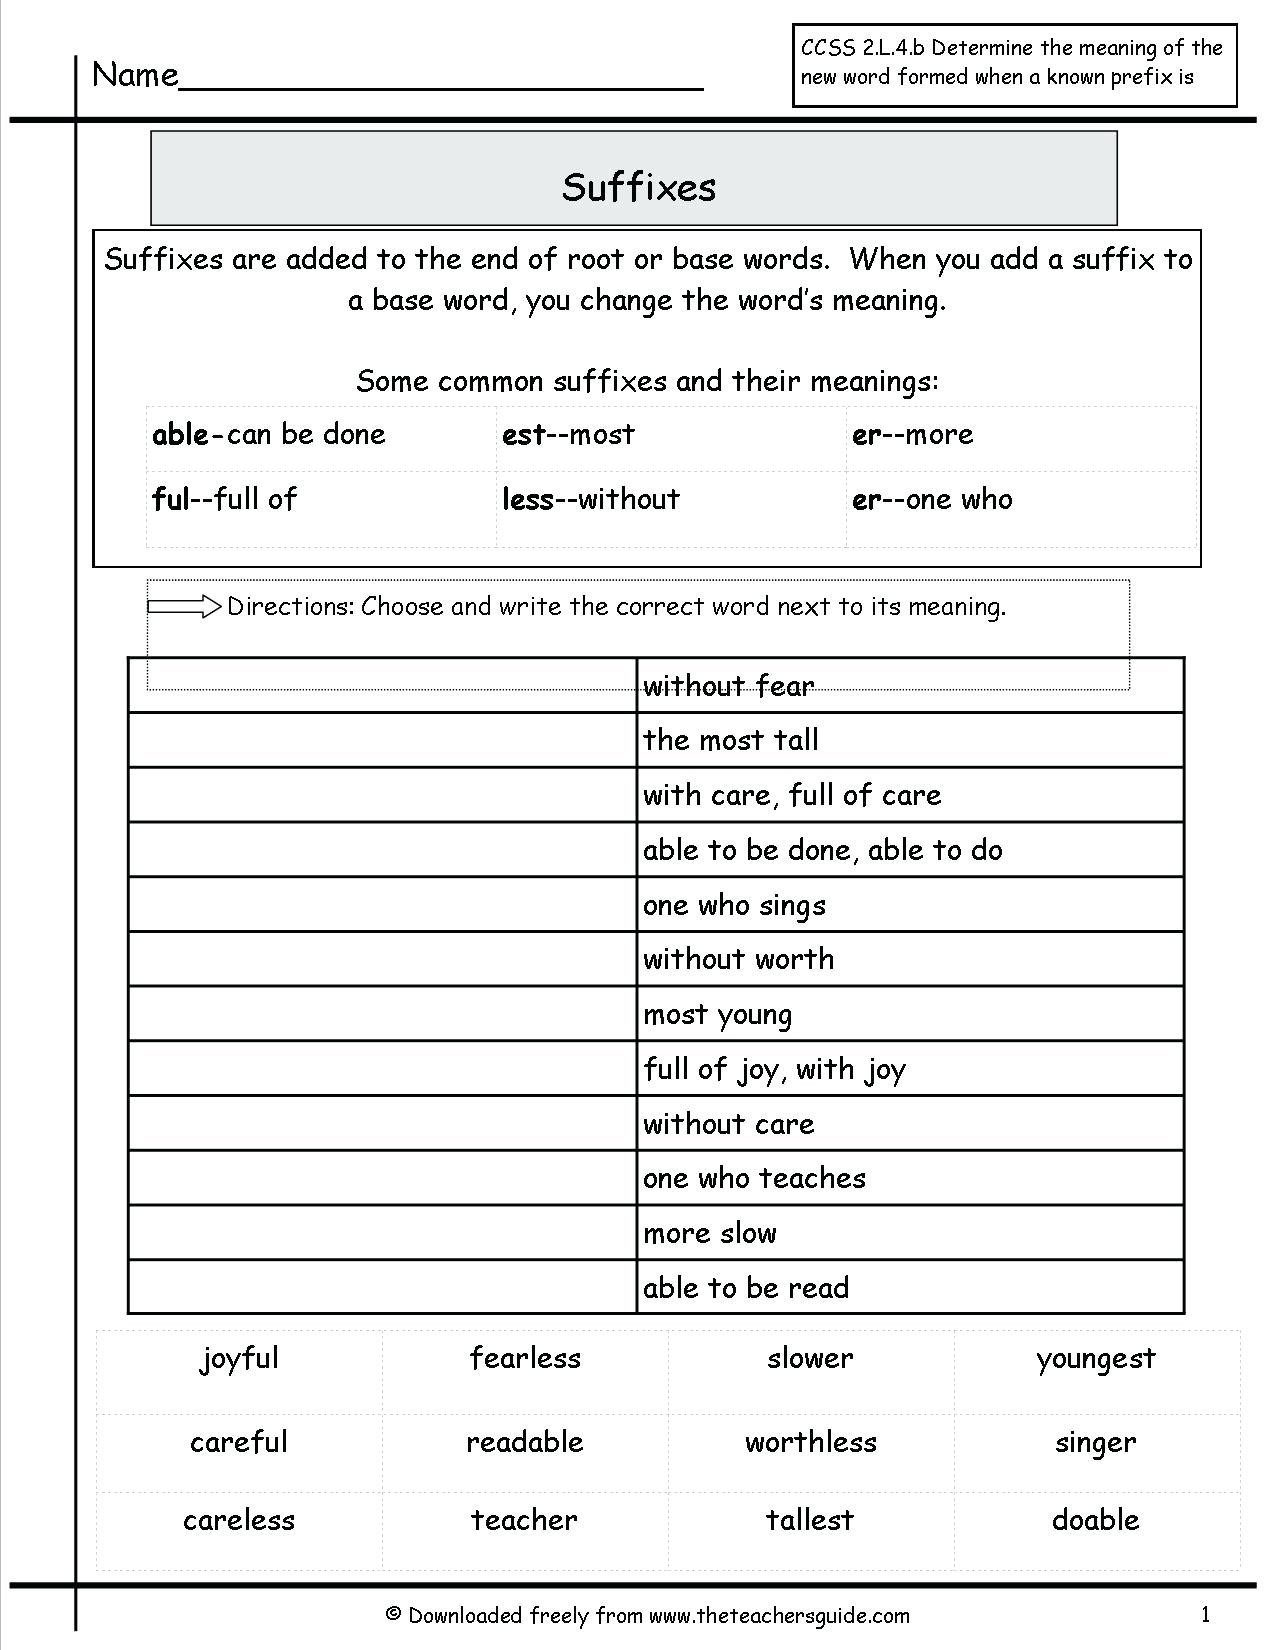 Suffixes Worksheet 3rd Grade 3rd Grade Prefixes and Suffixes Worksheets Root Words